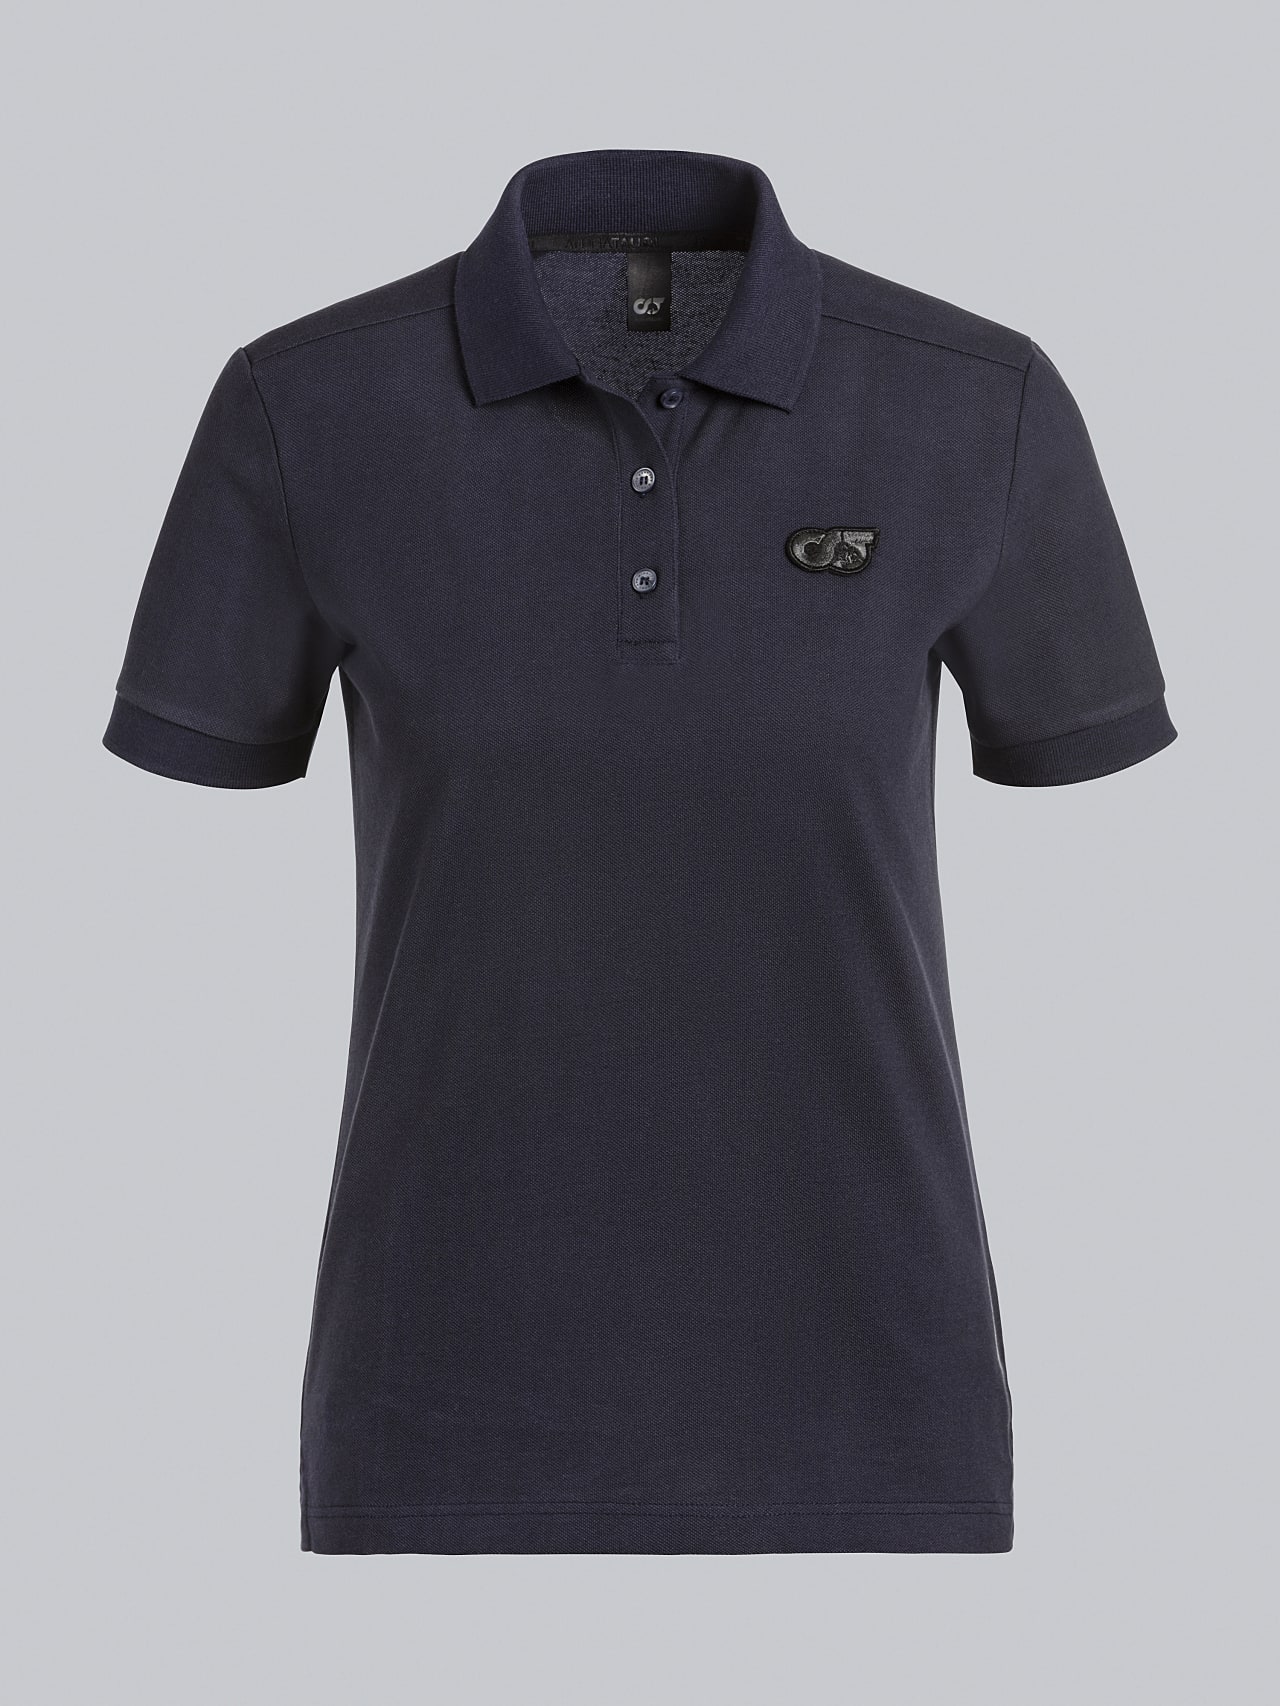 AlphaTauri | JANEY V1.Y5.02 | Pique Polo Shirt in navy for Women